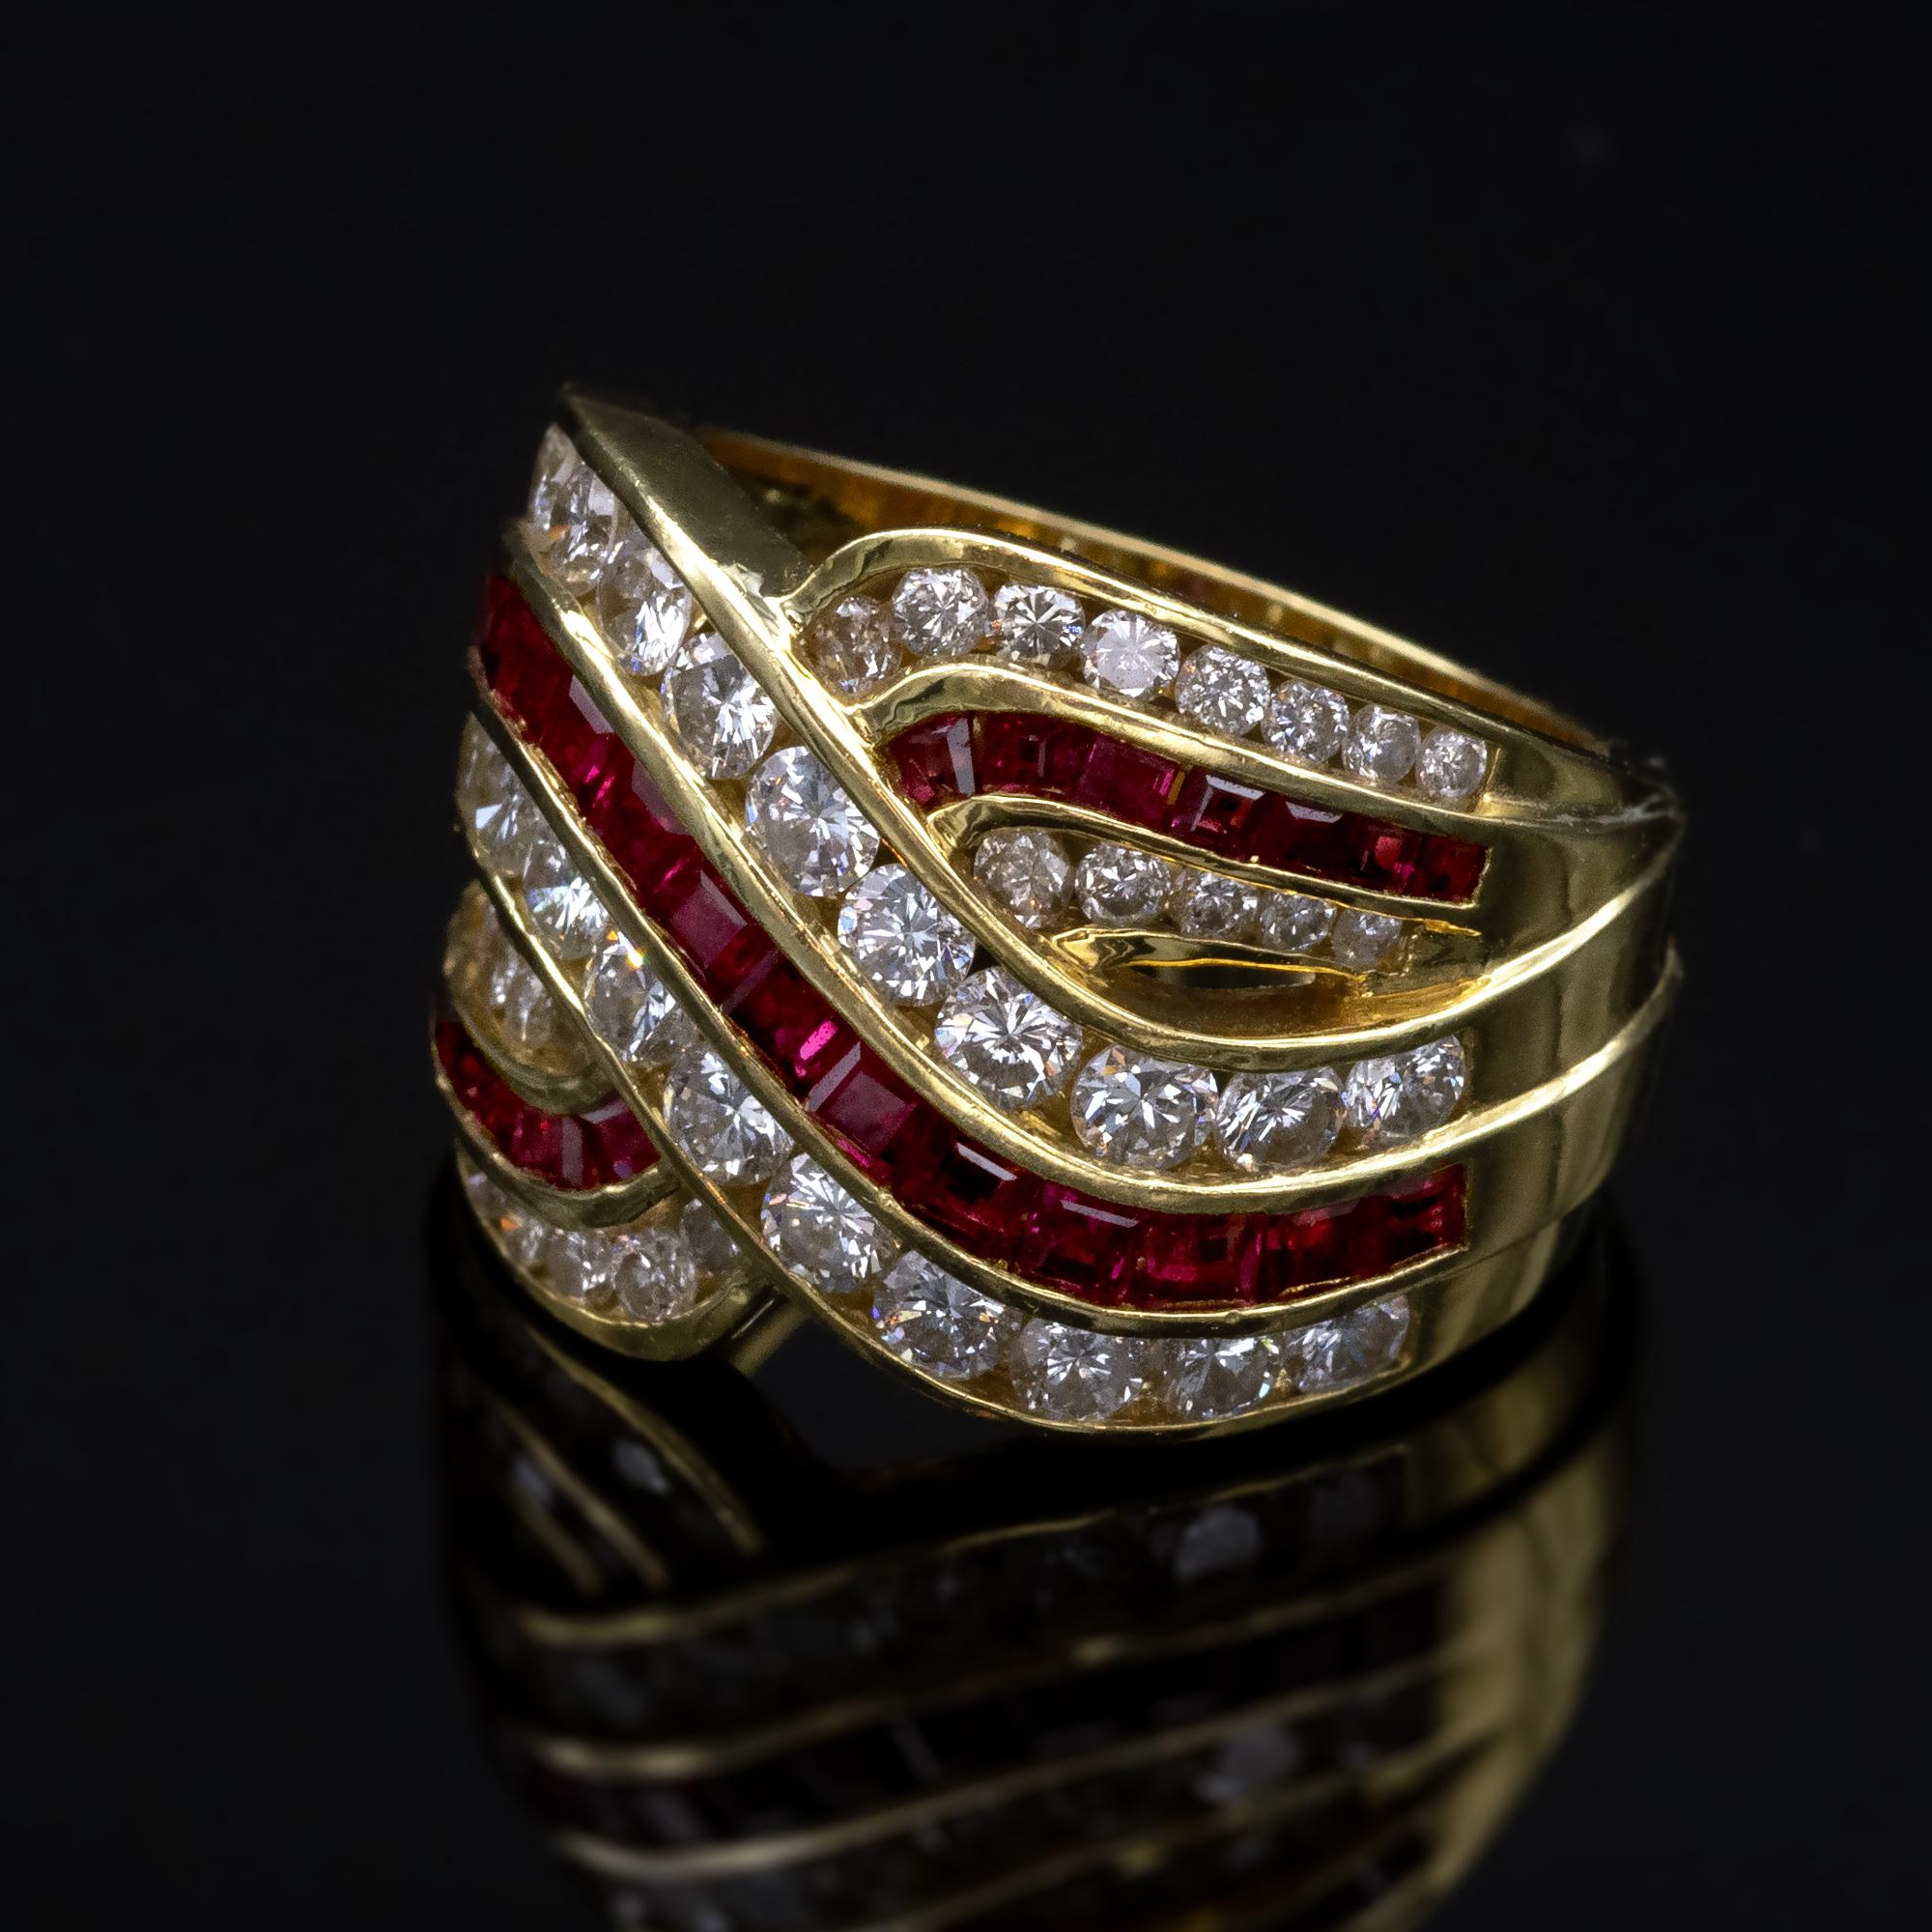 Classy wide solid 18 Karat yellow gold ring channel set with square rubies and white diamonds. 
excellent make, bearing the french 18 Kt hallmark state stamp.
Diamonds : ±2.16 carat ( F-G VVS-VS )
Ruby: ± 1.34 carat